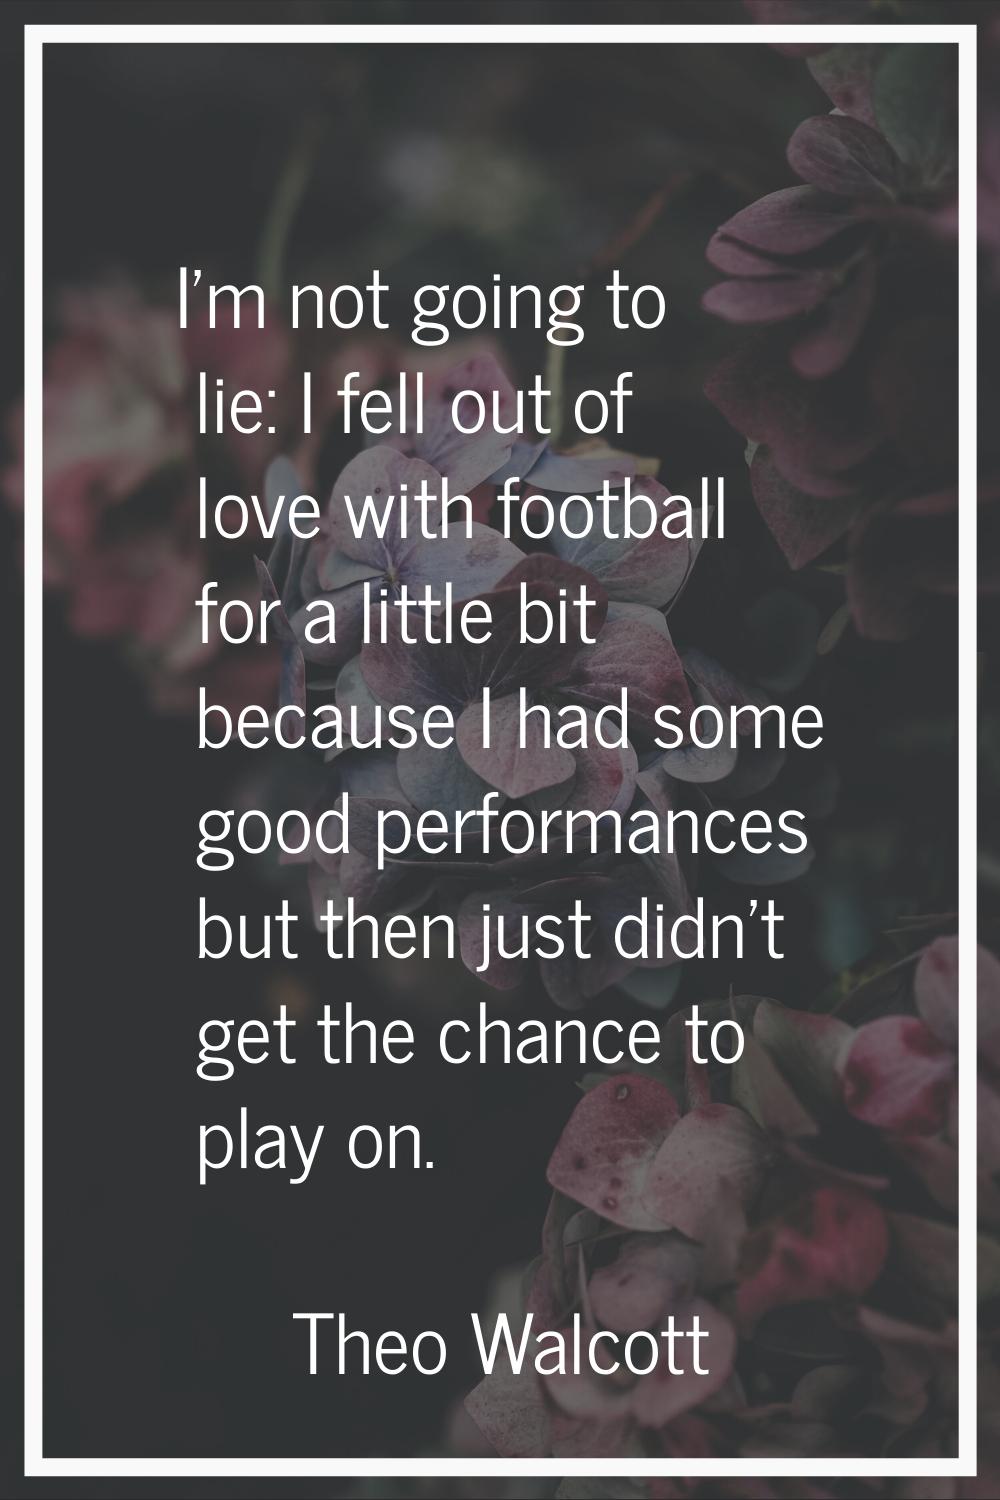 I'm not going to lie: I fell out of love with football for a little bit because I had some good per